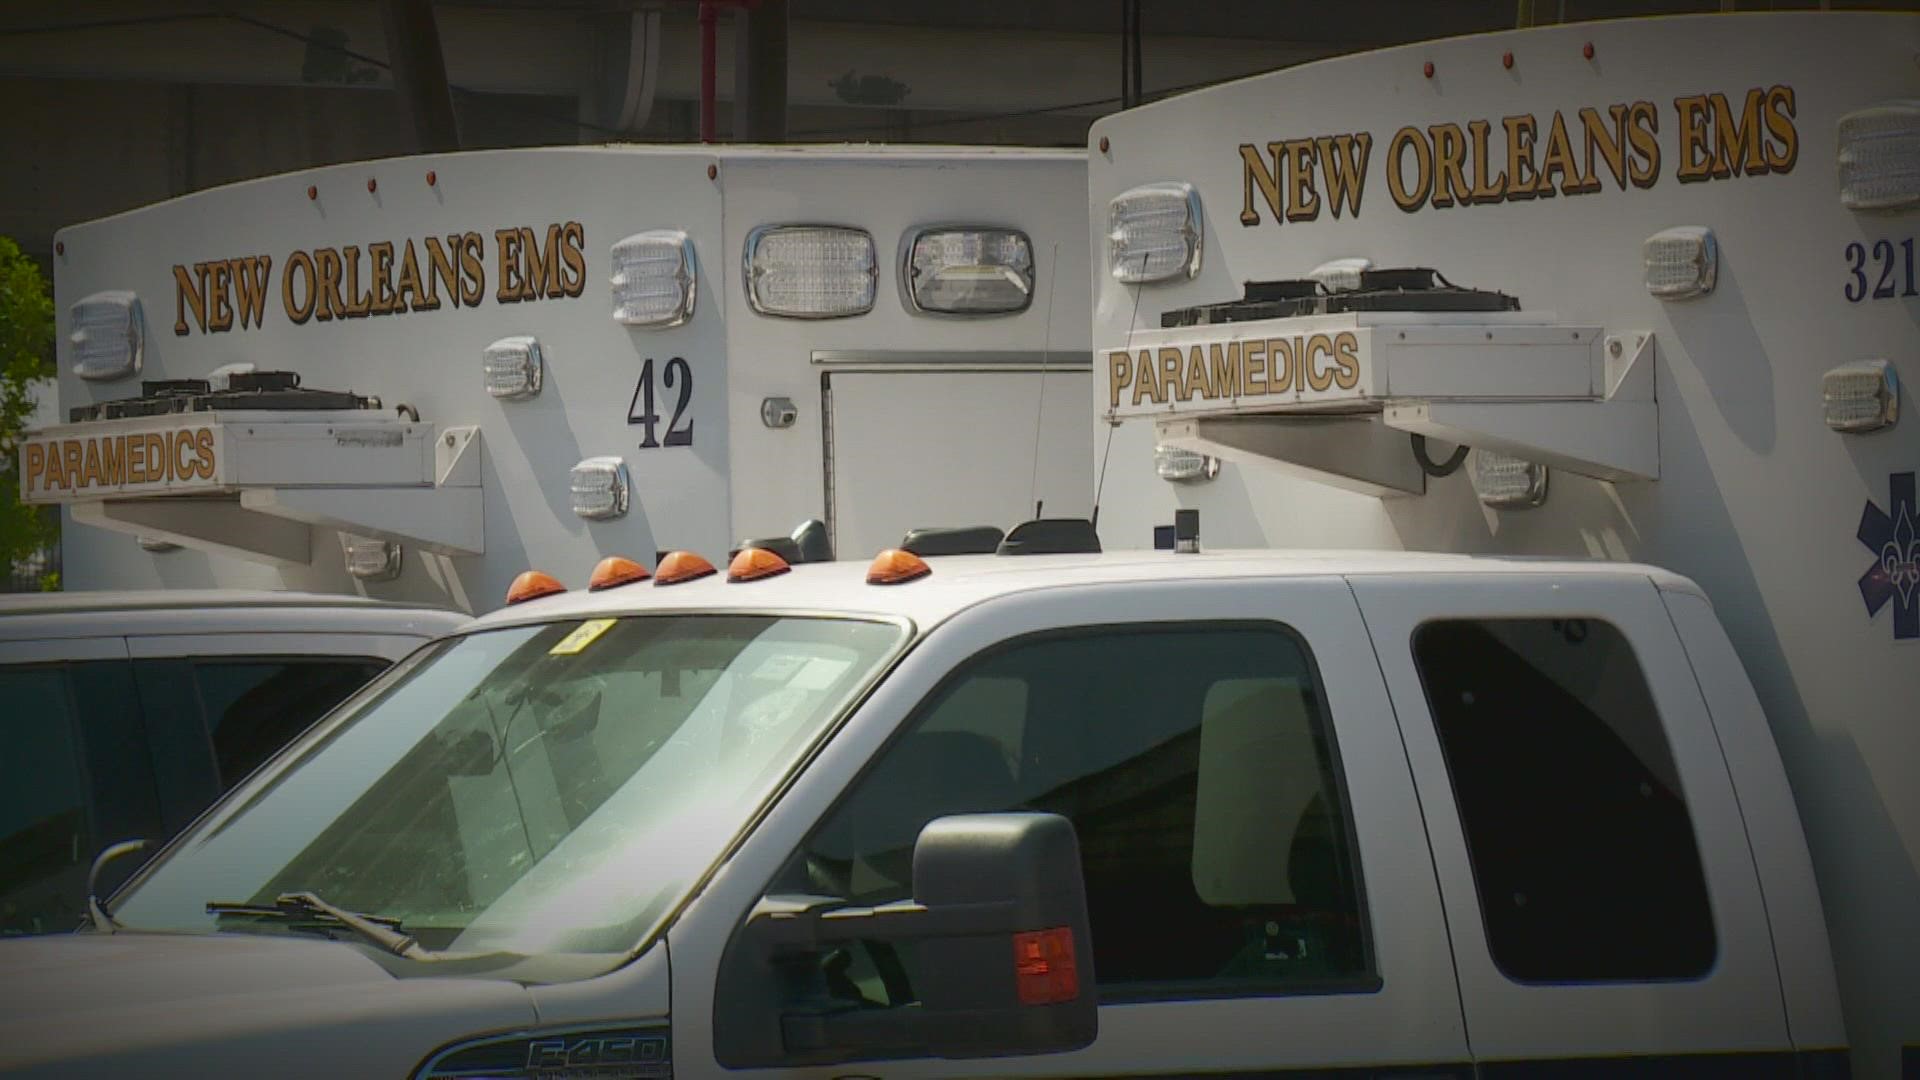 Low staffing is becoming a major issue for the city of New Orleans Emergency Services as there are limited workers able to respond to every crisis.